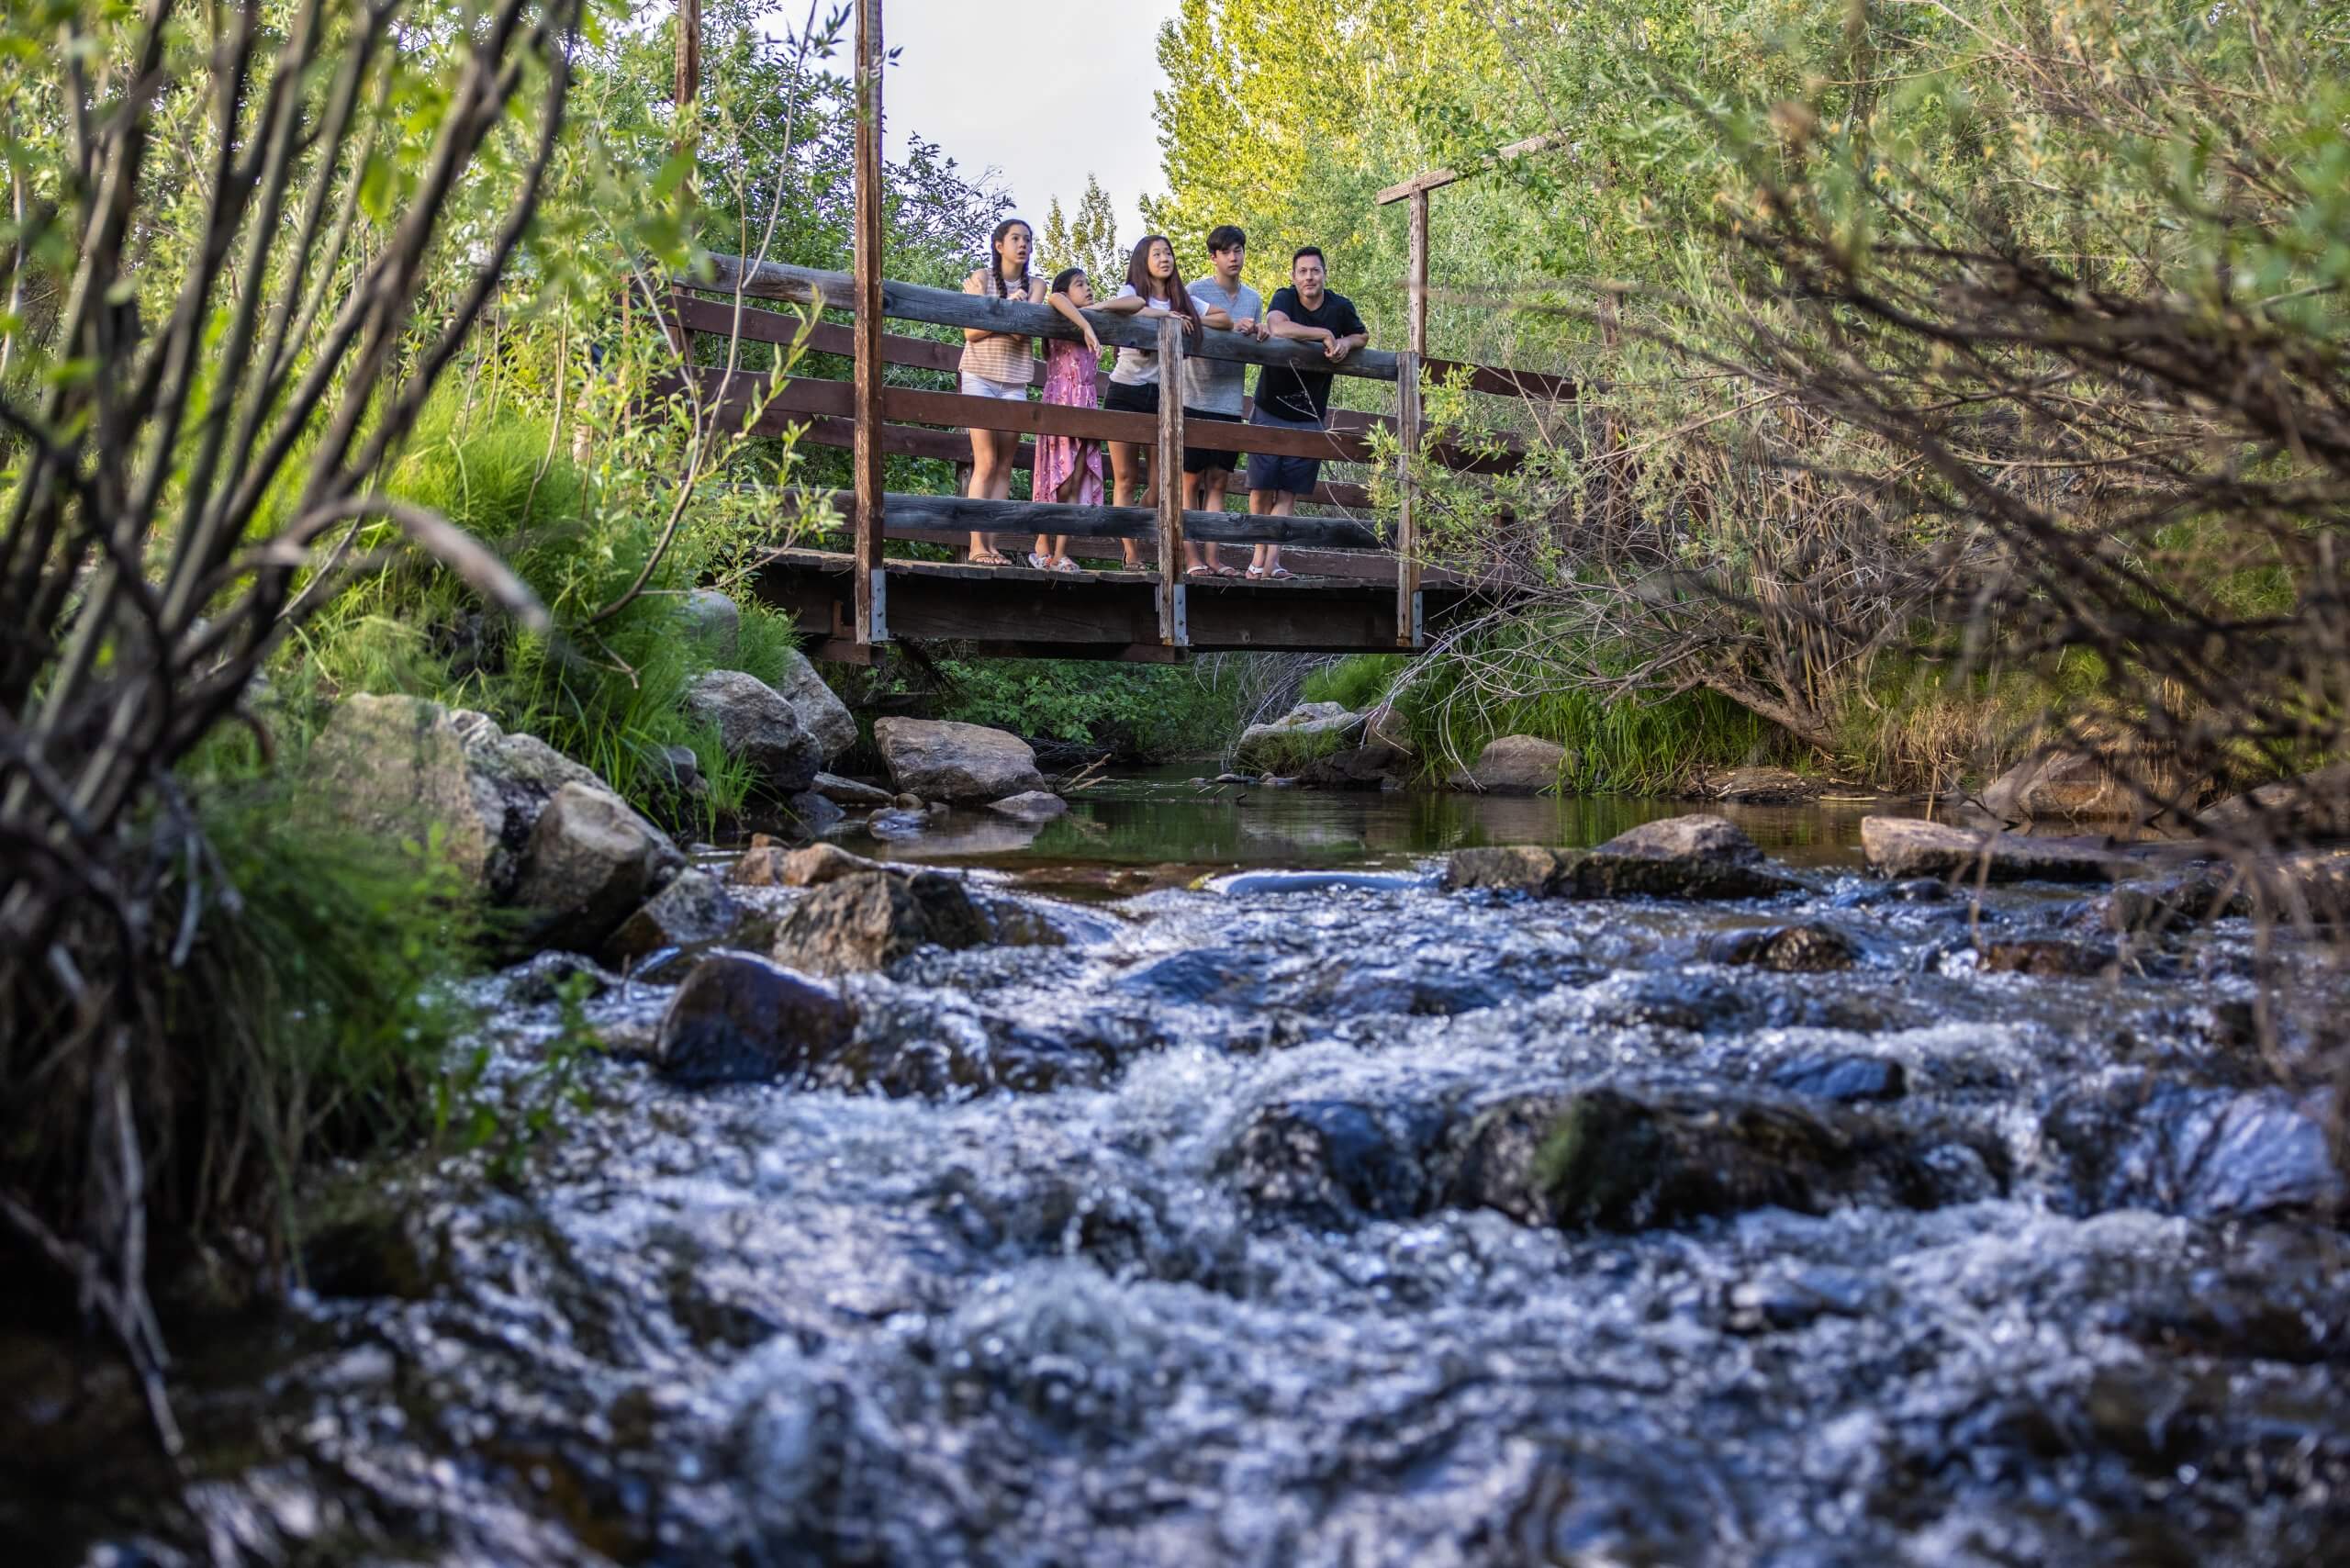 A group of people standing on a wooden bridge crossing a river in a forest, along the Buena Vista Trail.